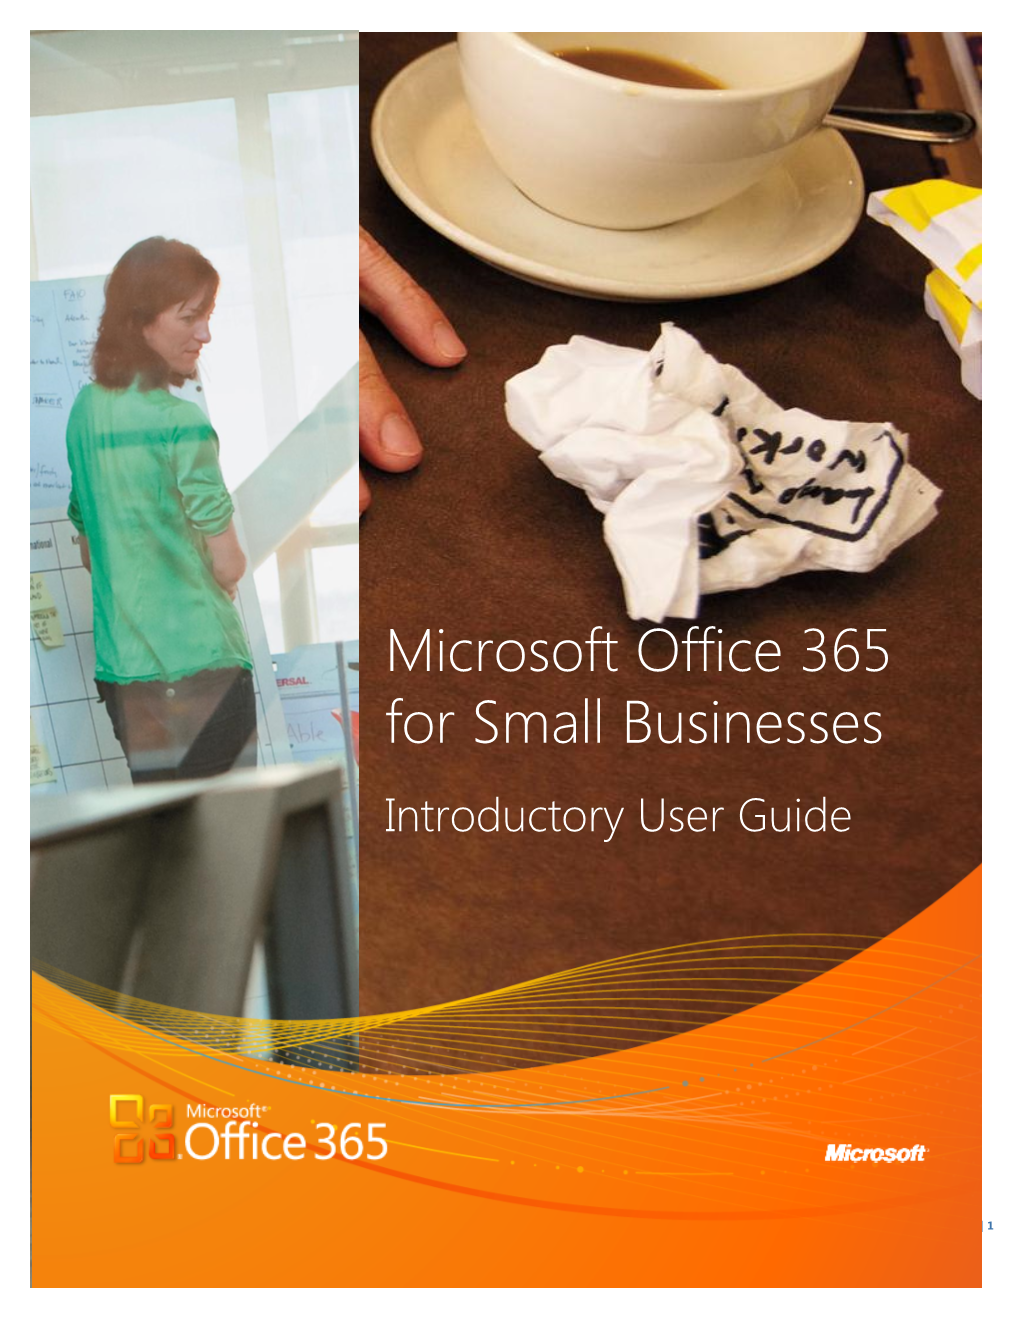 Microsoft Office 365 for Small Businesses Introductory User Guide